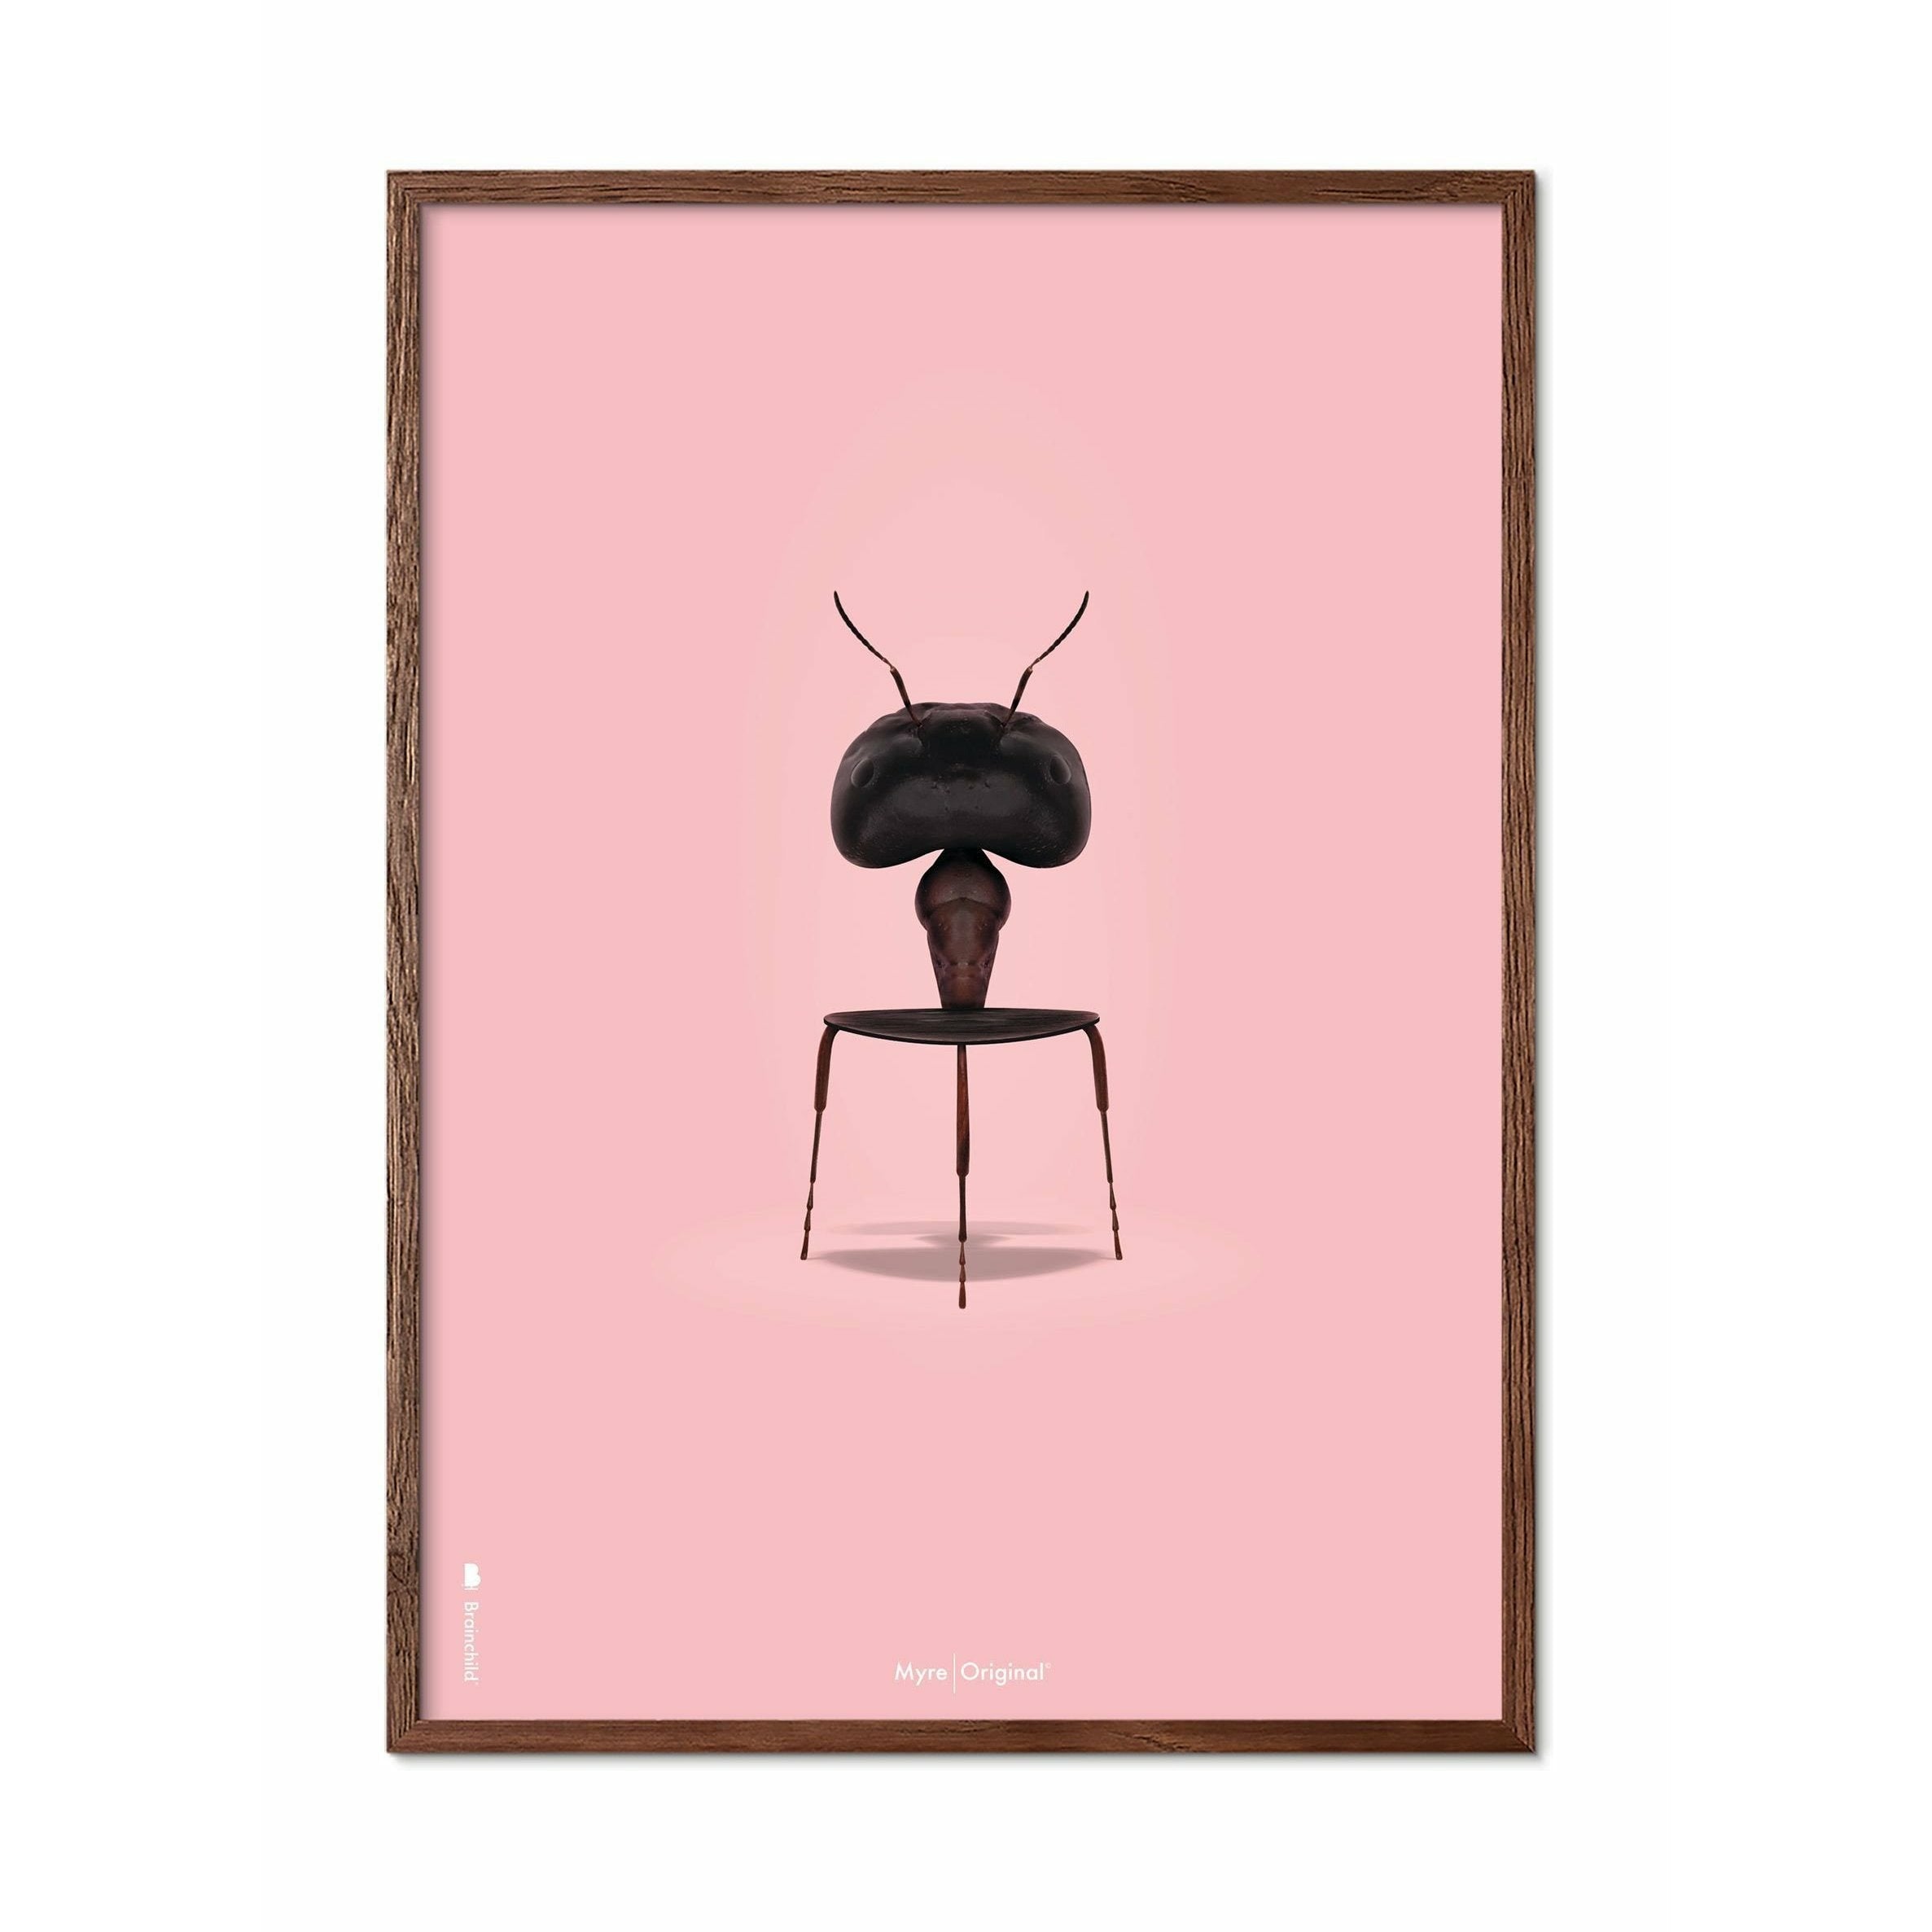 Brainchild Ant Classic Poster, Frame Made Of Dark Wood 50x70 Cm, Pink Background